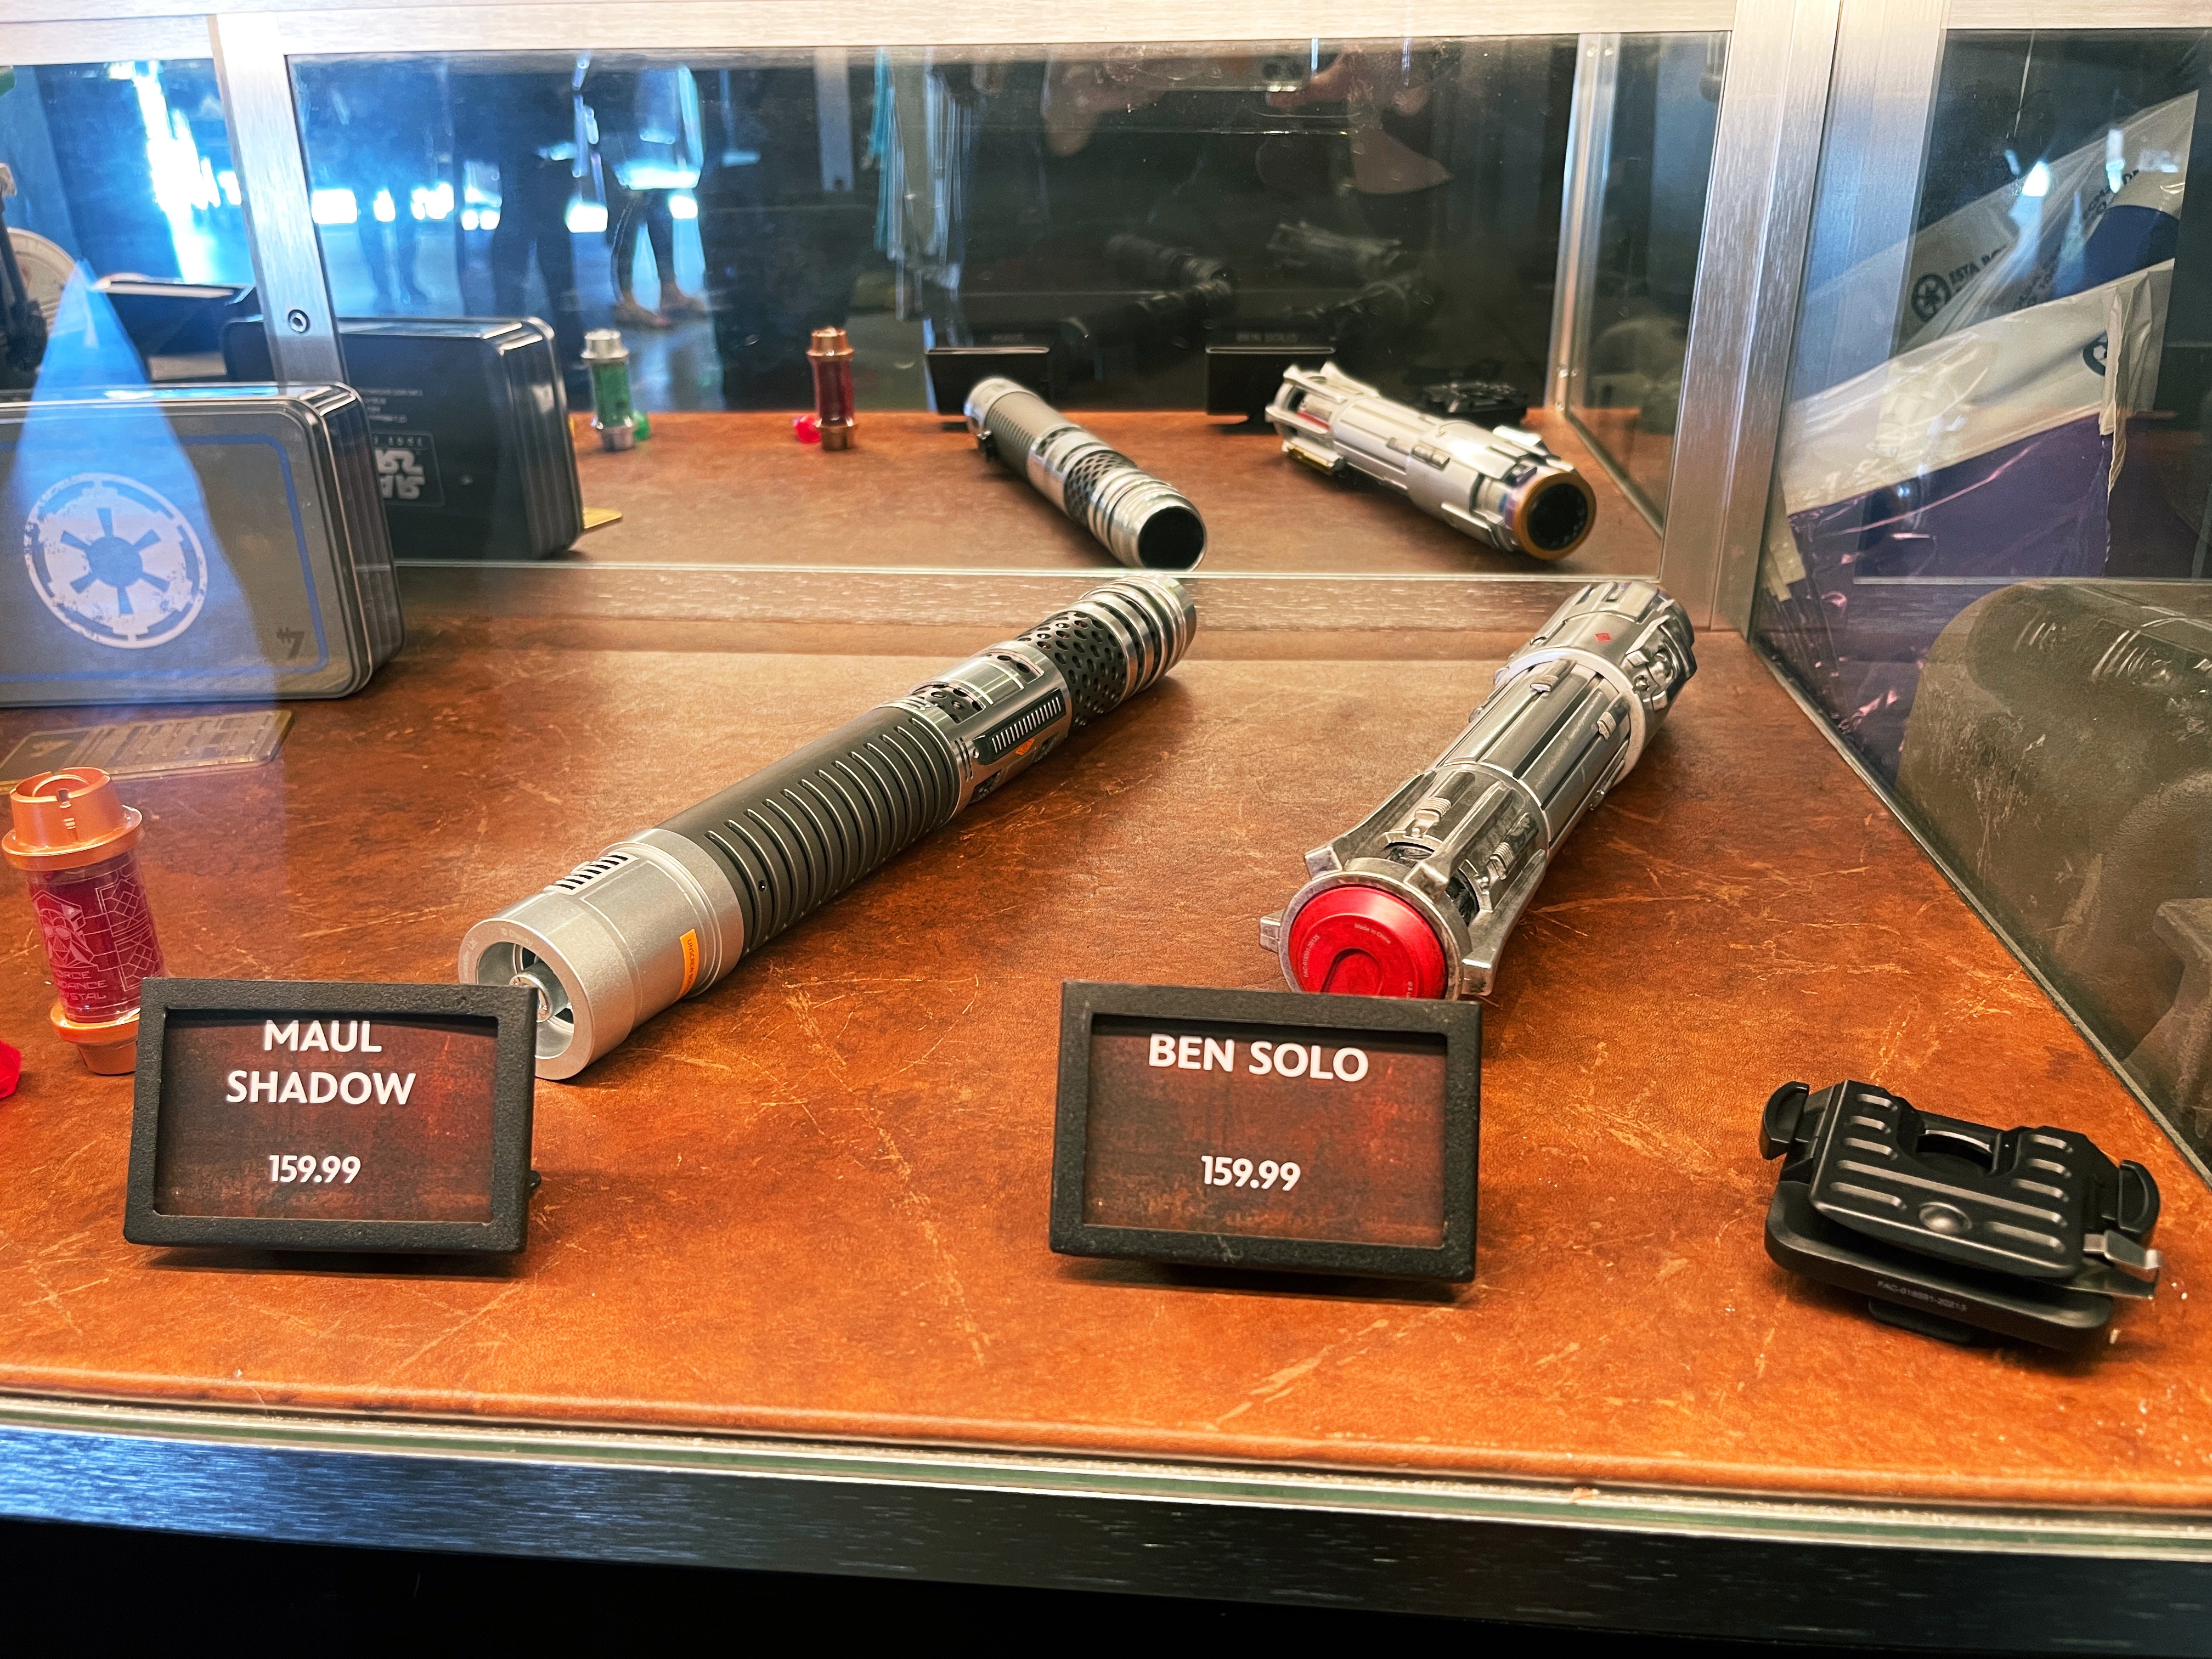 Star Wars: Galaxy's Edge - Maul Shadow Legacy Lightsaber , Poe's Bandolier & More! | Anakin and His Angel